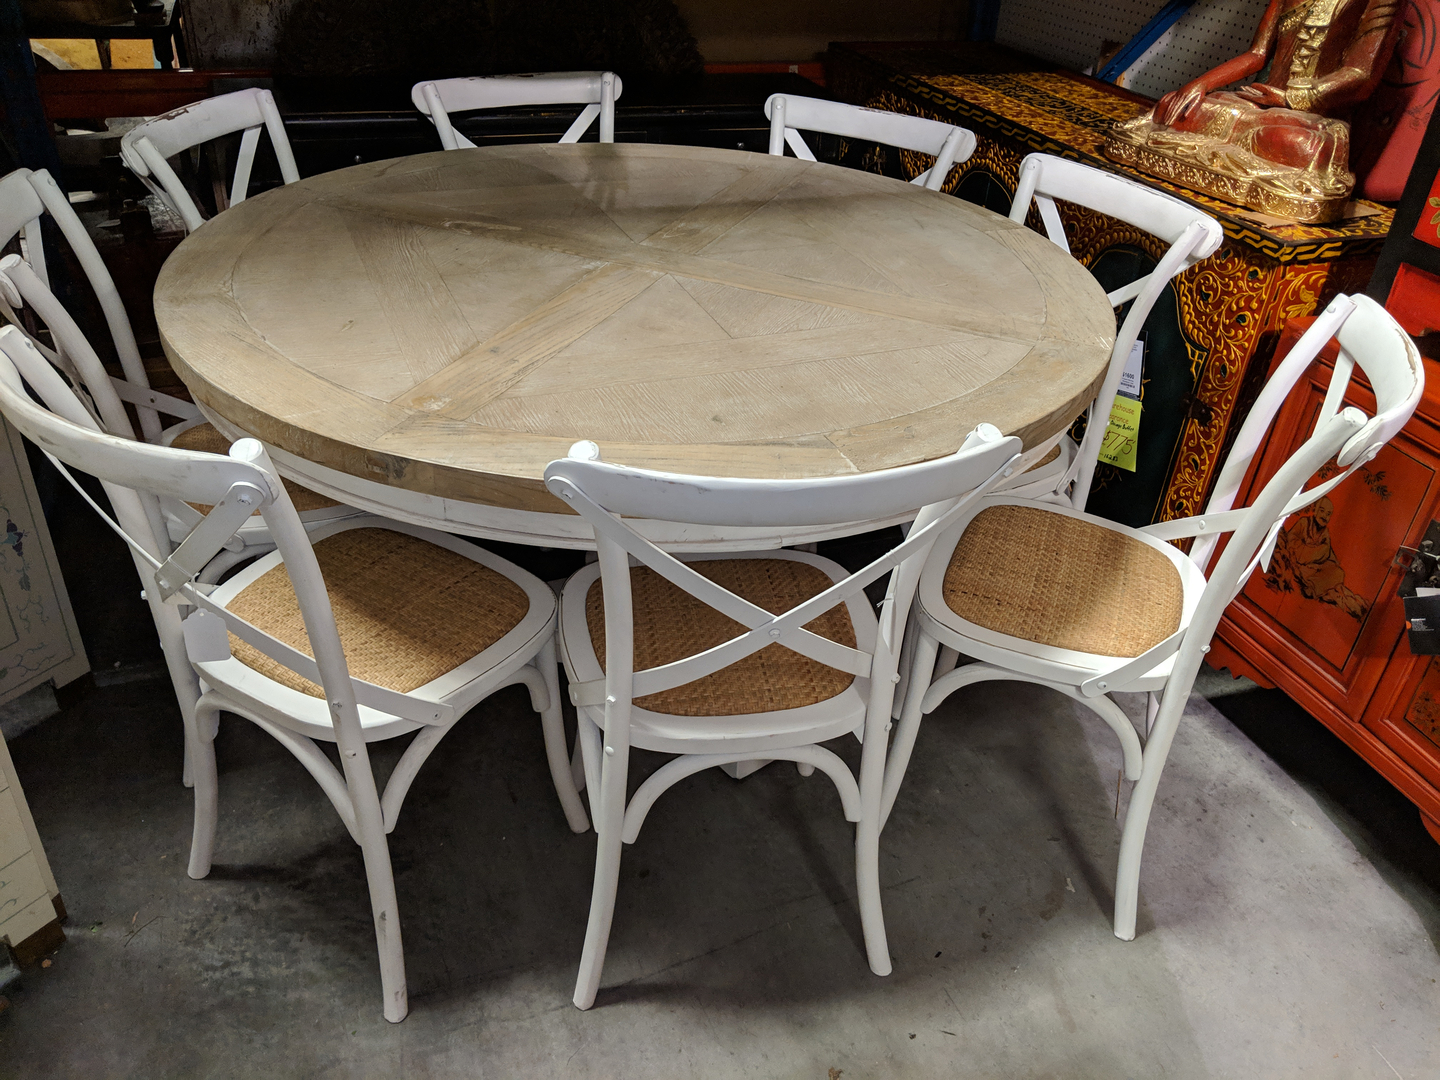 Wholesale 120cm round table For Amazing Dining Settings 